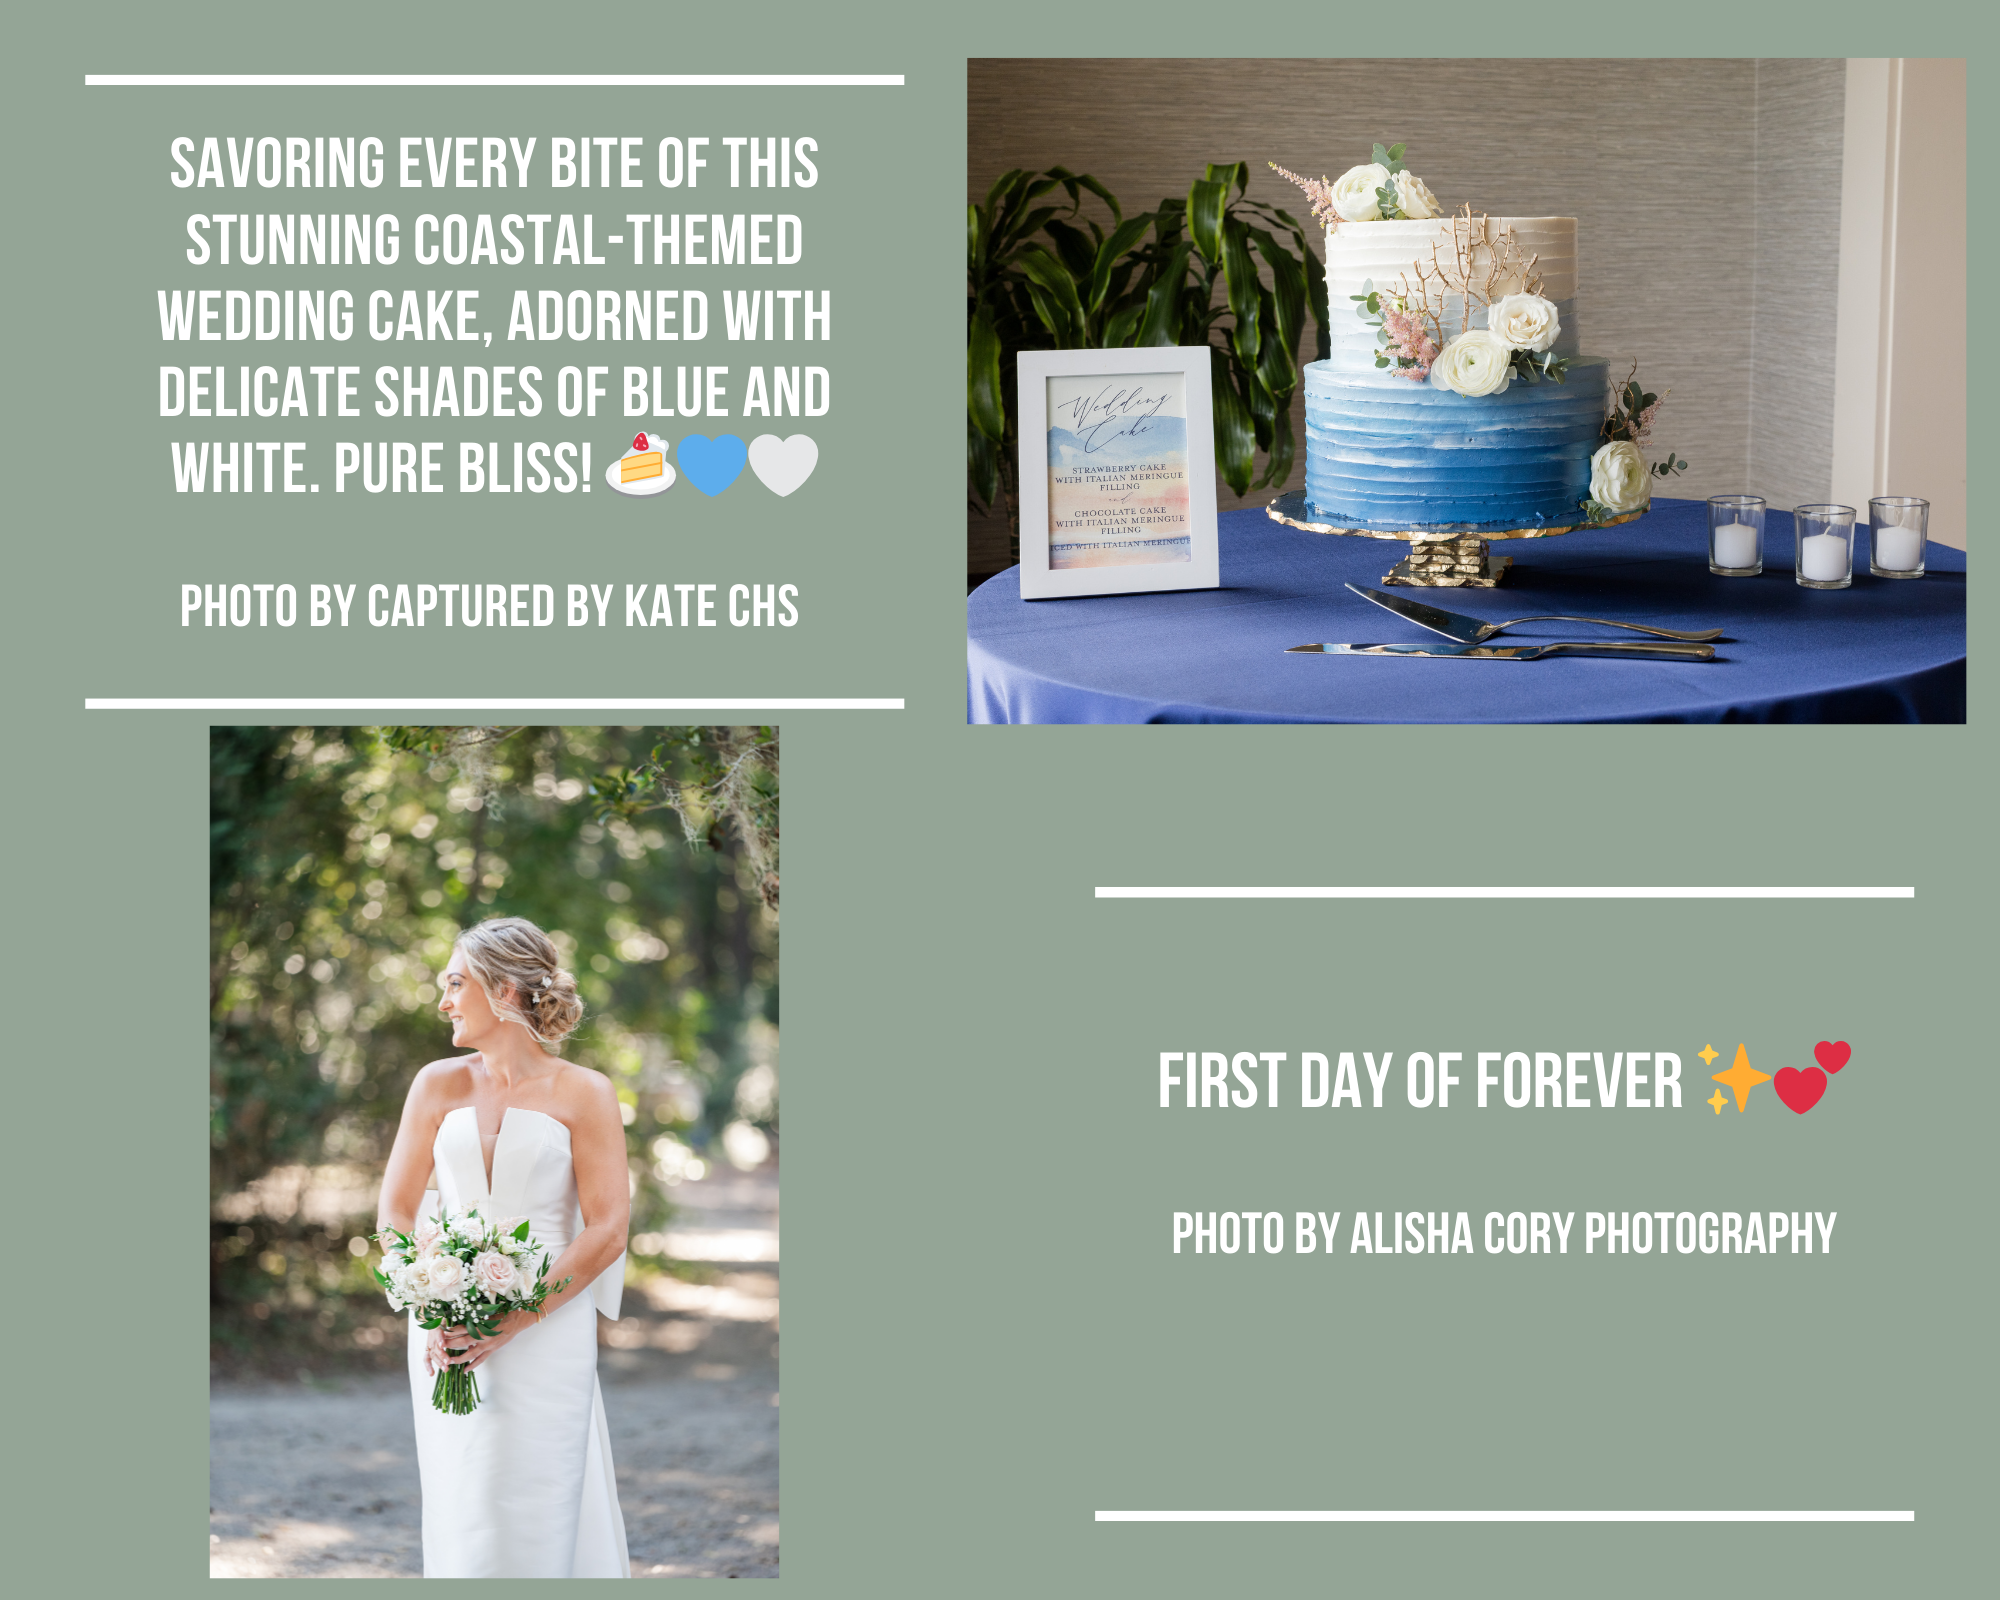 Copy of We loved working with this soft color palette! Photos by catherine ann photography - 1